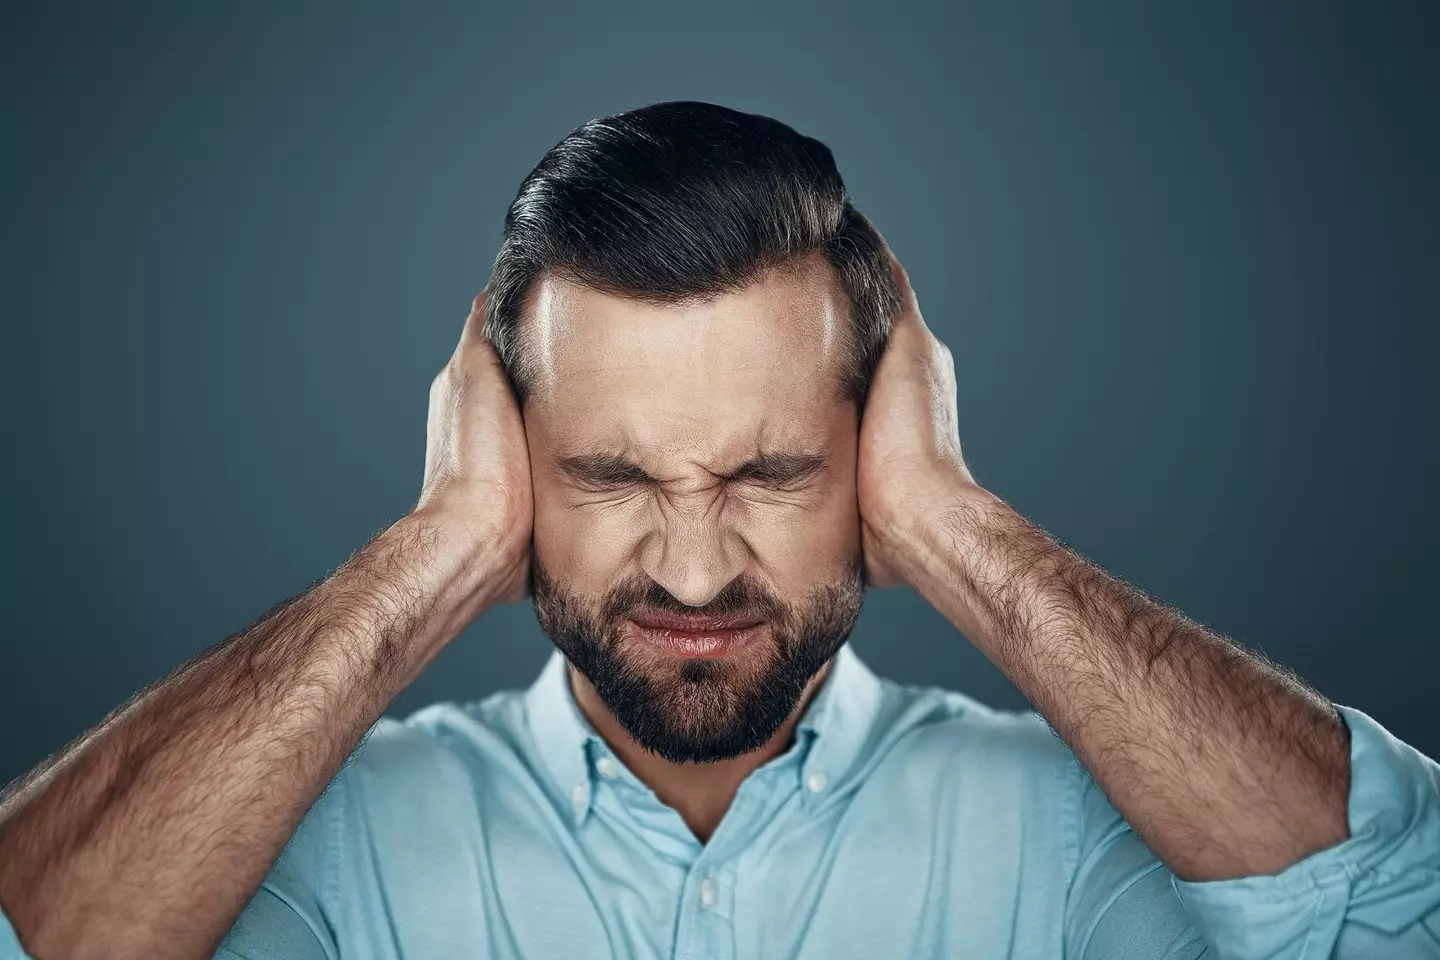 There's a reason we all hate the sound of our own voice. Getty stock image